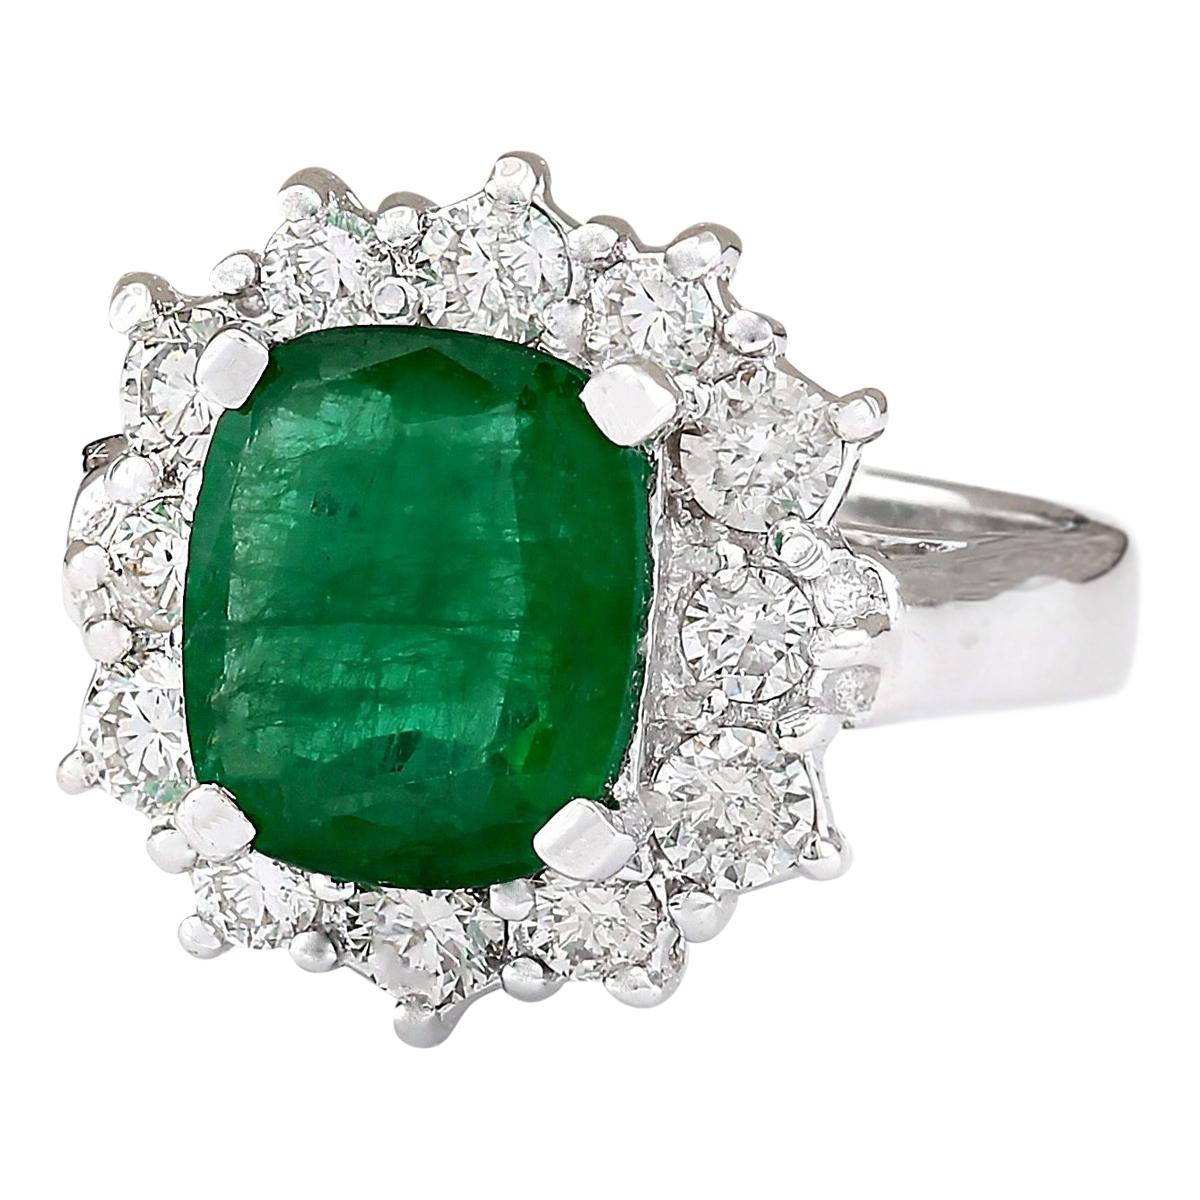 Stamped: 14K White Gold
Total Ring Weight: 6.7 Grams
Total Natural Emerald Weight is 2.10 Carat (Measures: 10.00x8.00 mm)
Color: Green
Diamond Weight: Total Natural Diamond Weight is 1.10 Carat
Color: F-G, Clarity: VS2-SI1
Face Measures: 15.90x14.65